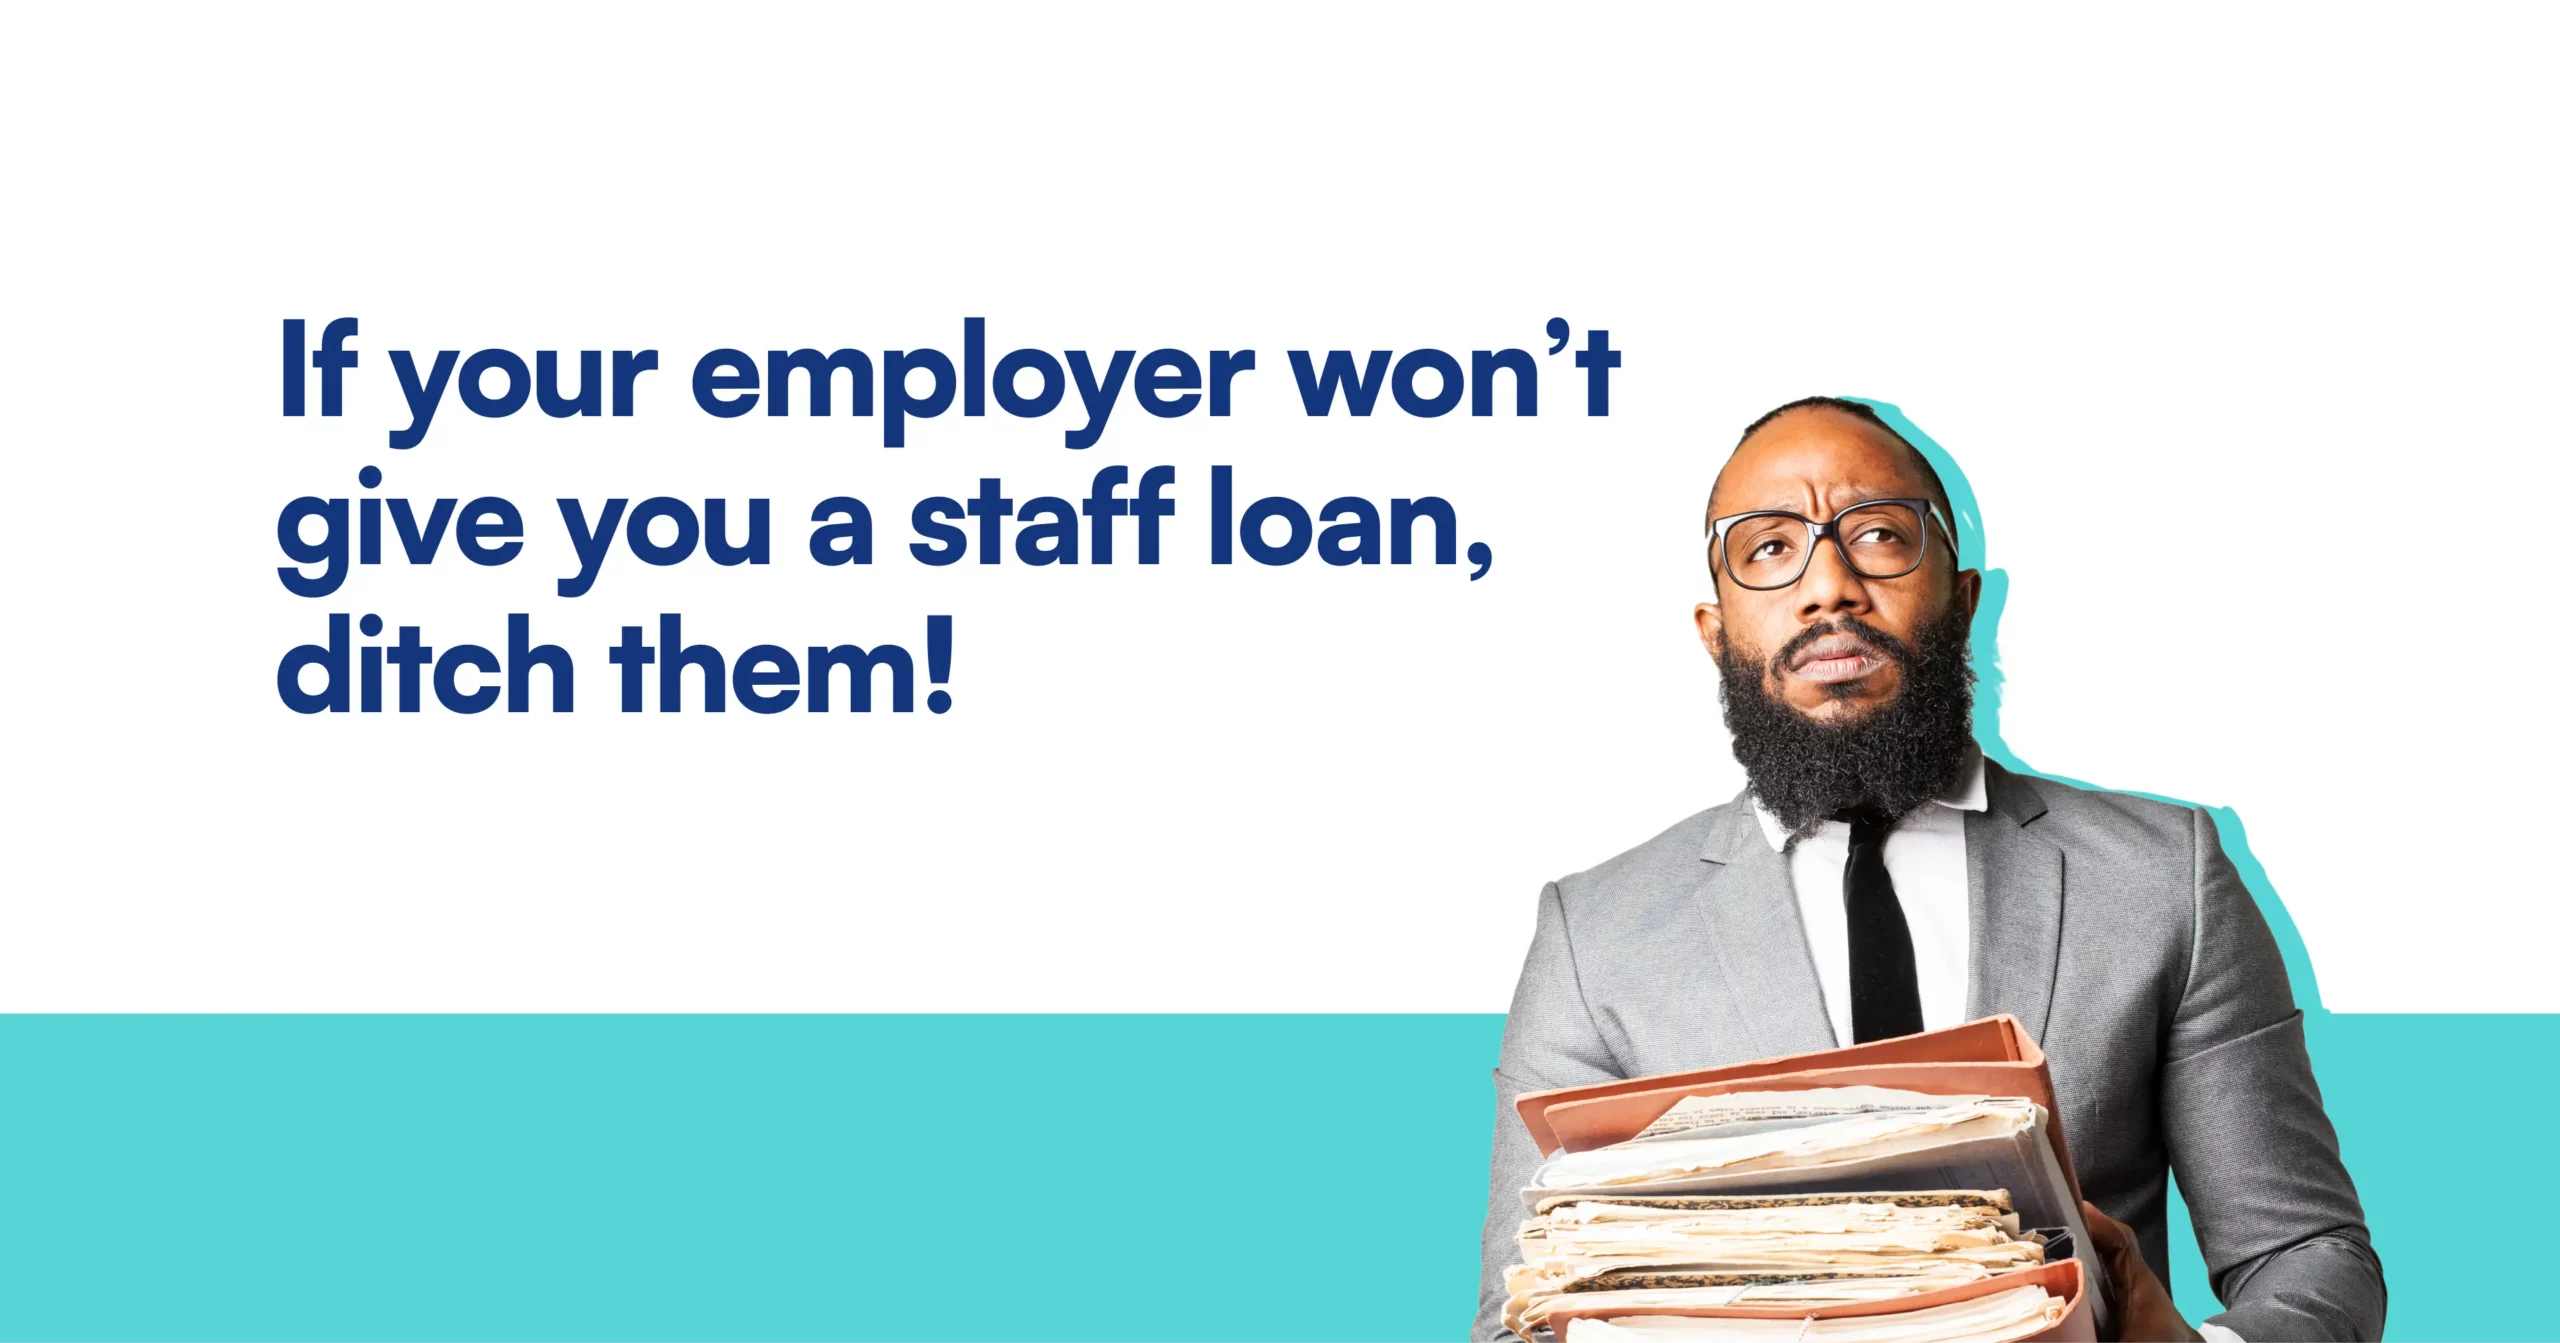 If your employer won’t give you a staff loan, ditch them!